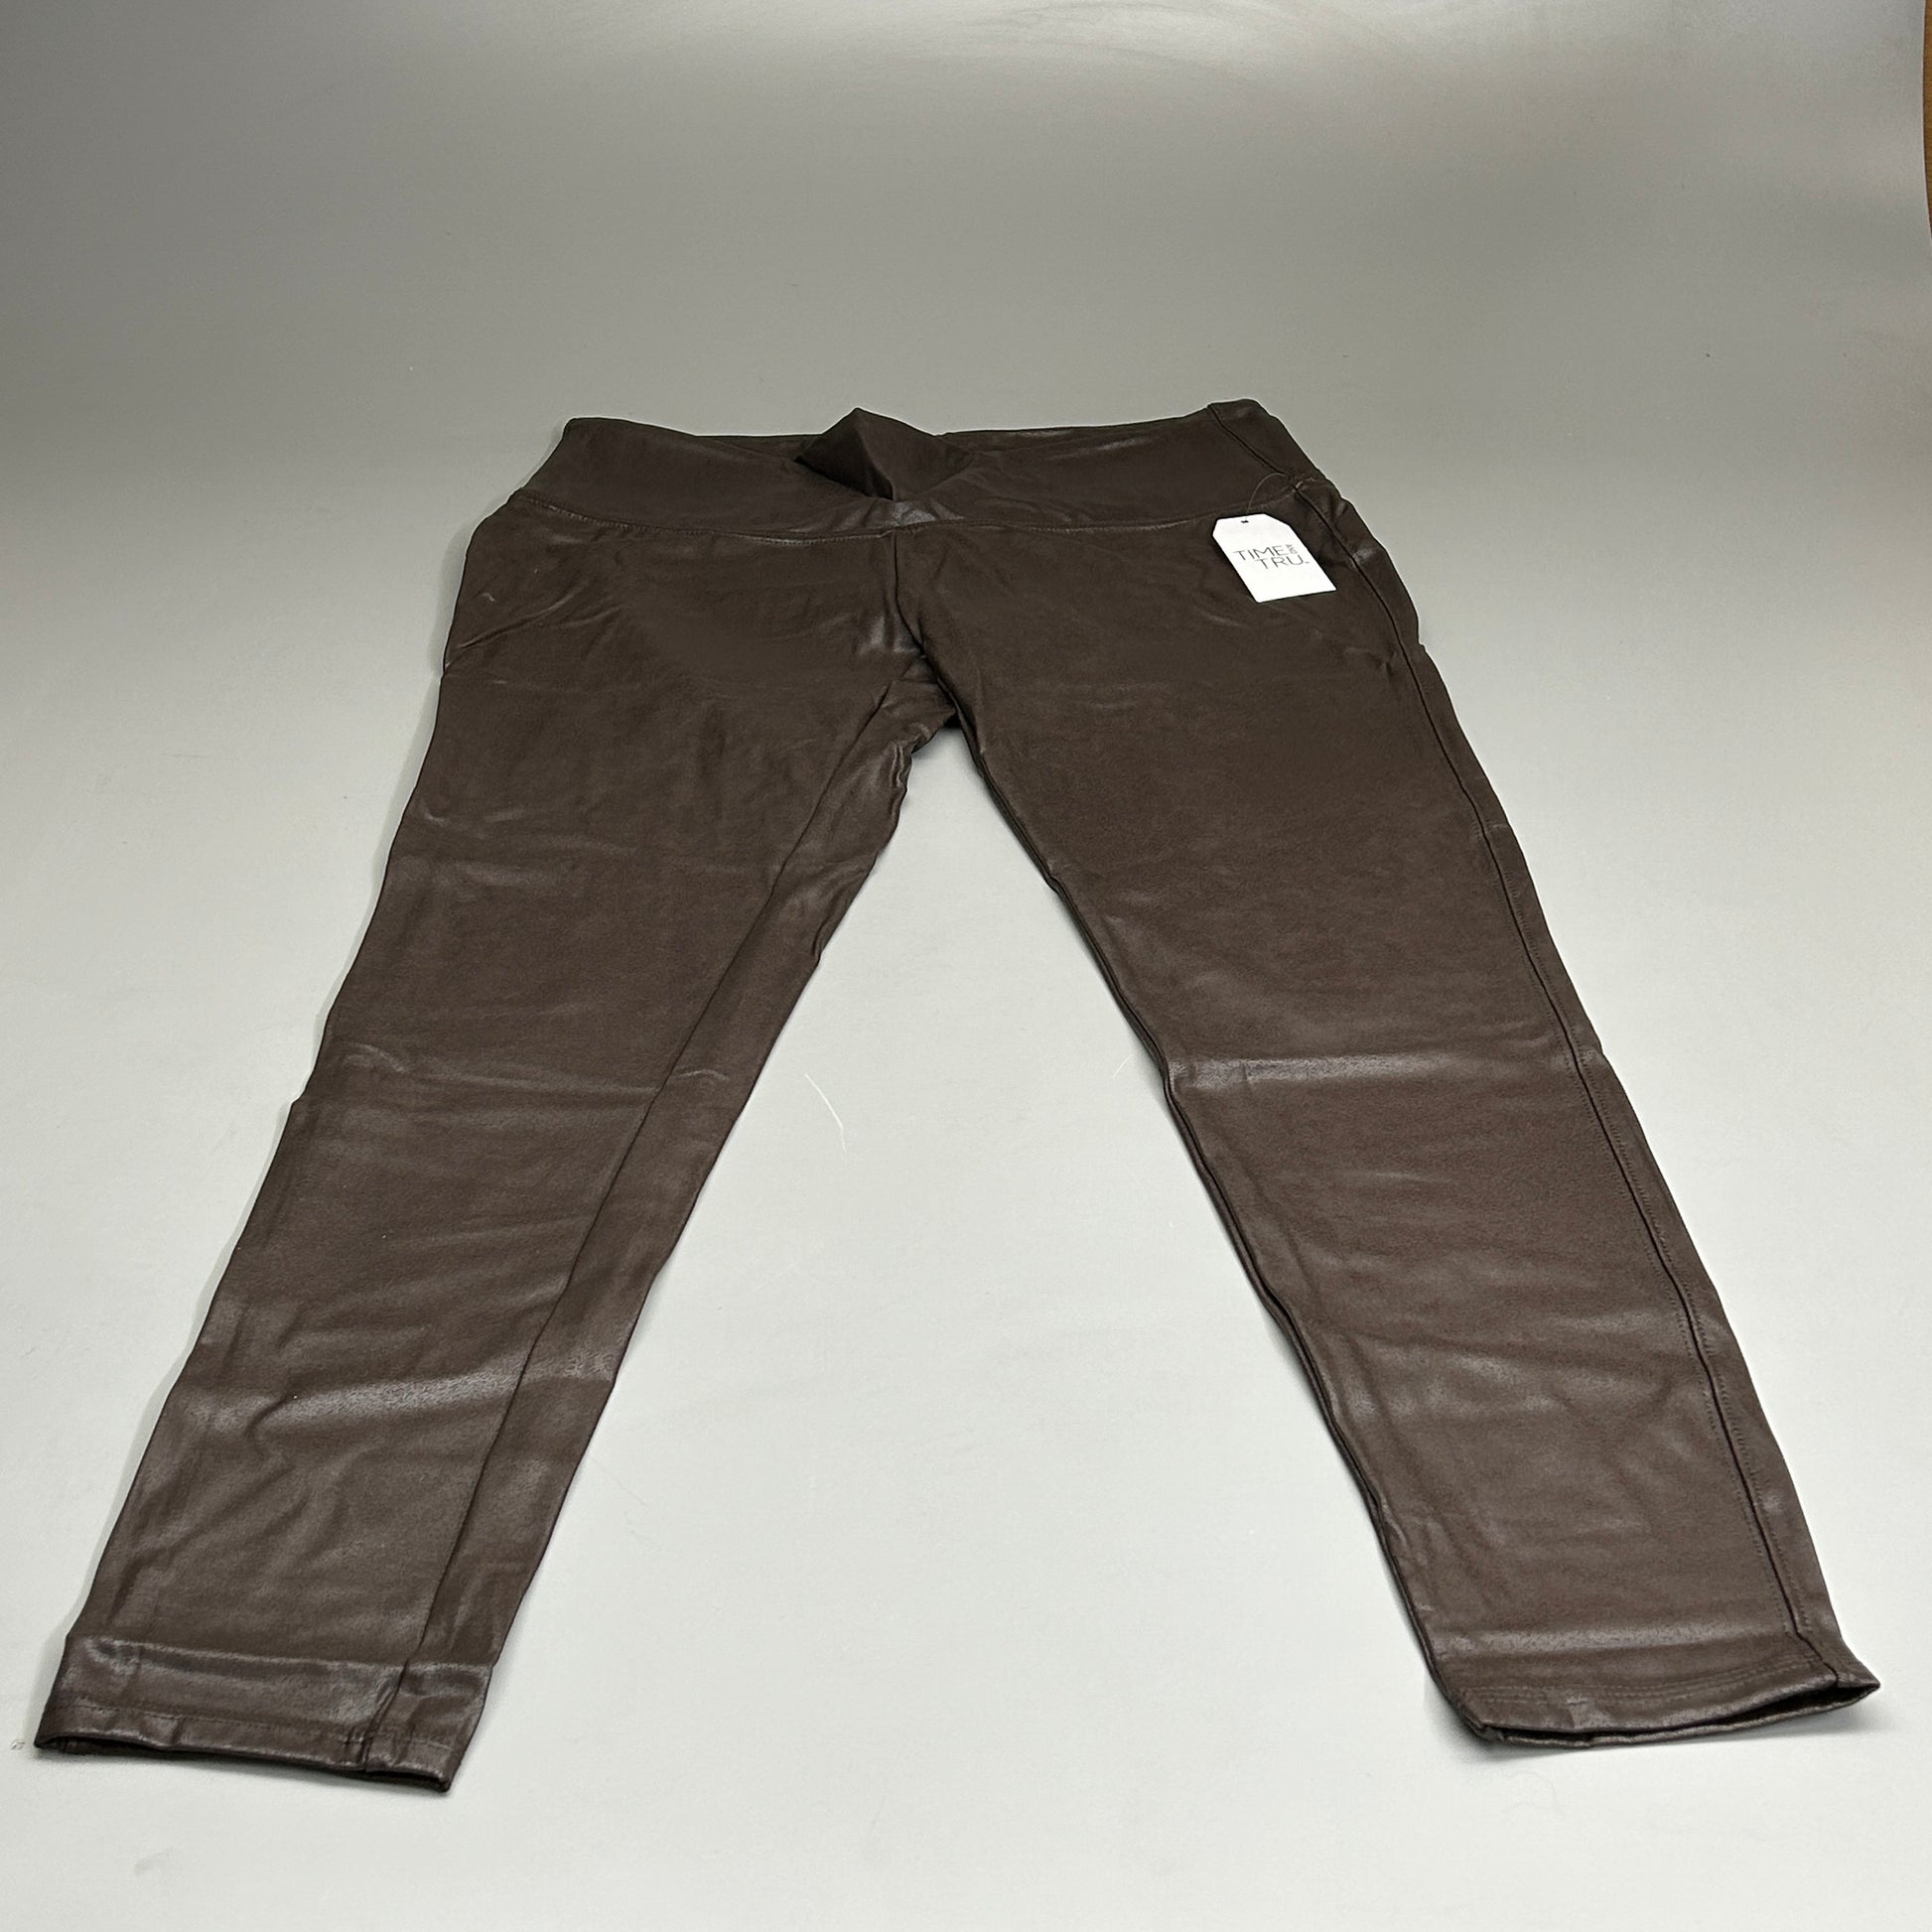 TIME AND TRU Women's Faux Leather Leggings Sz M 8-10 Brown (New)